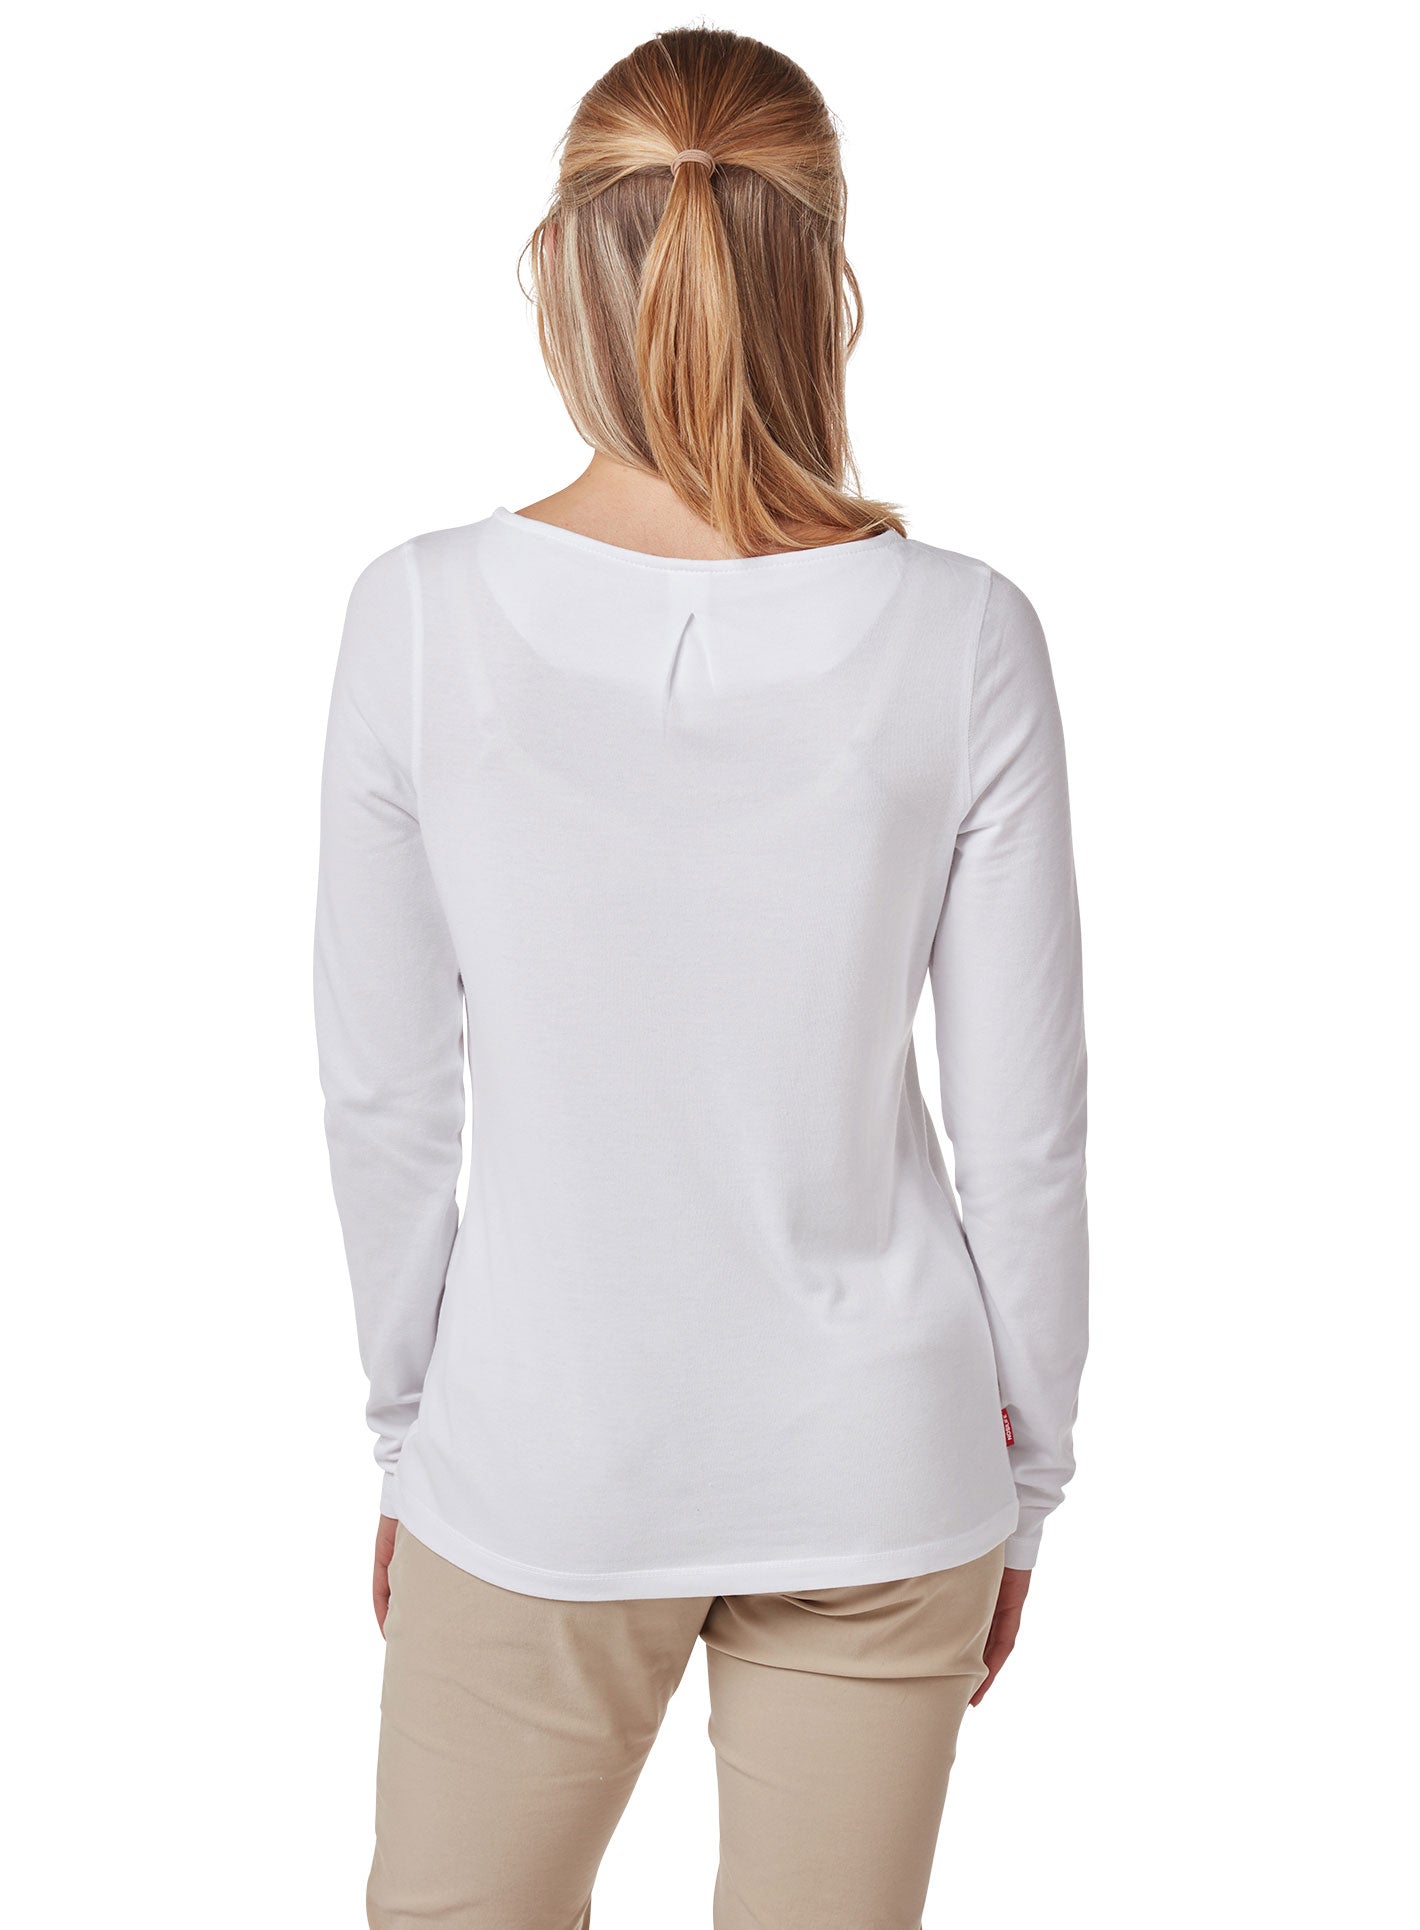 Optic White Ladies NosiLife Erin Long Sleeve Top by Craghoppers